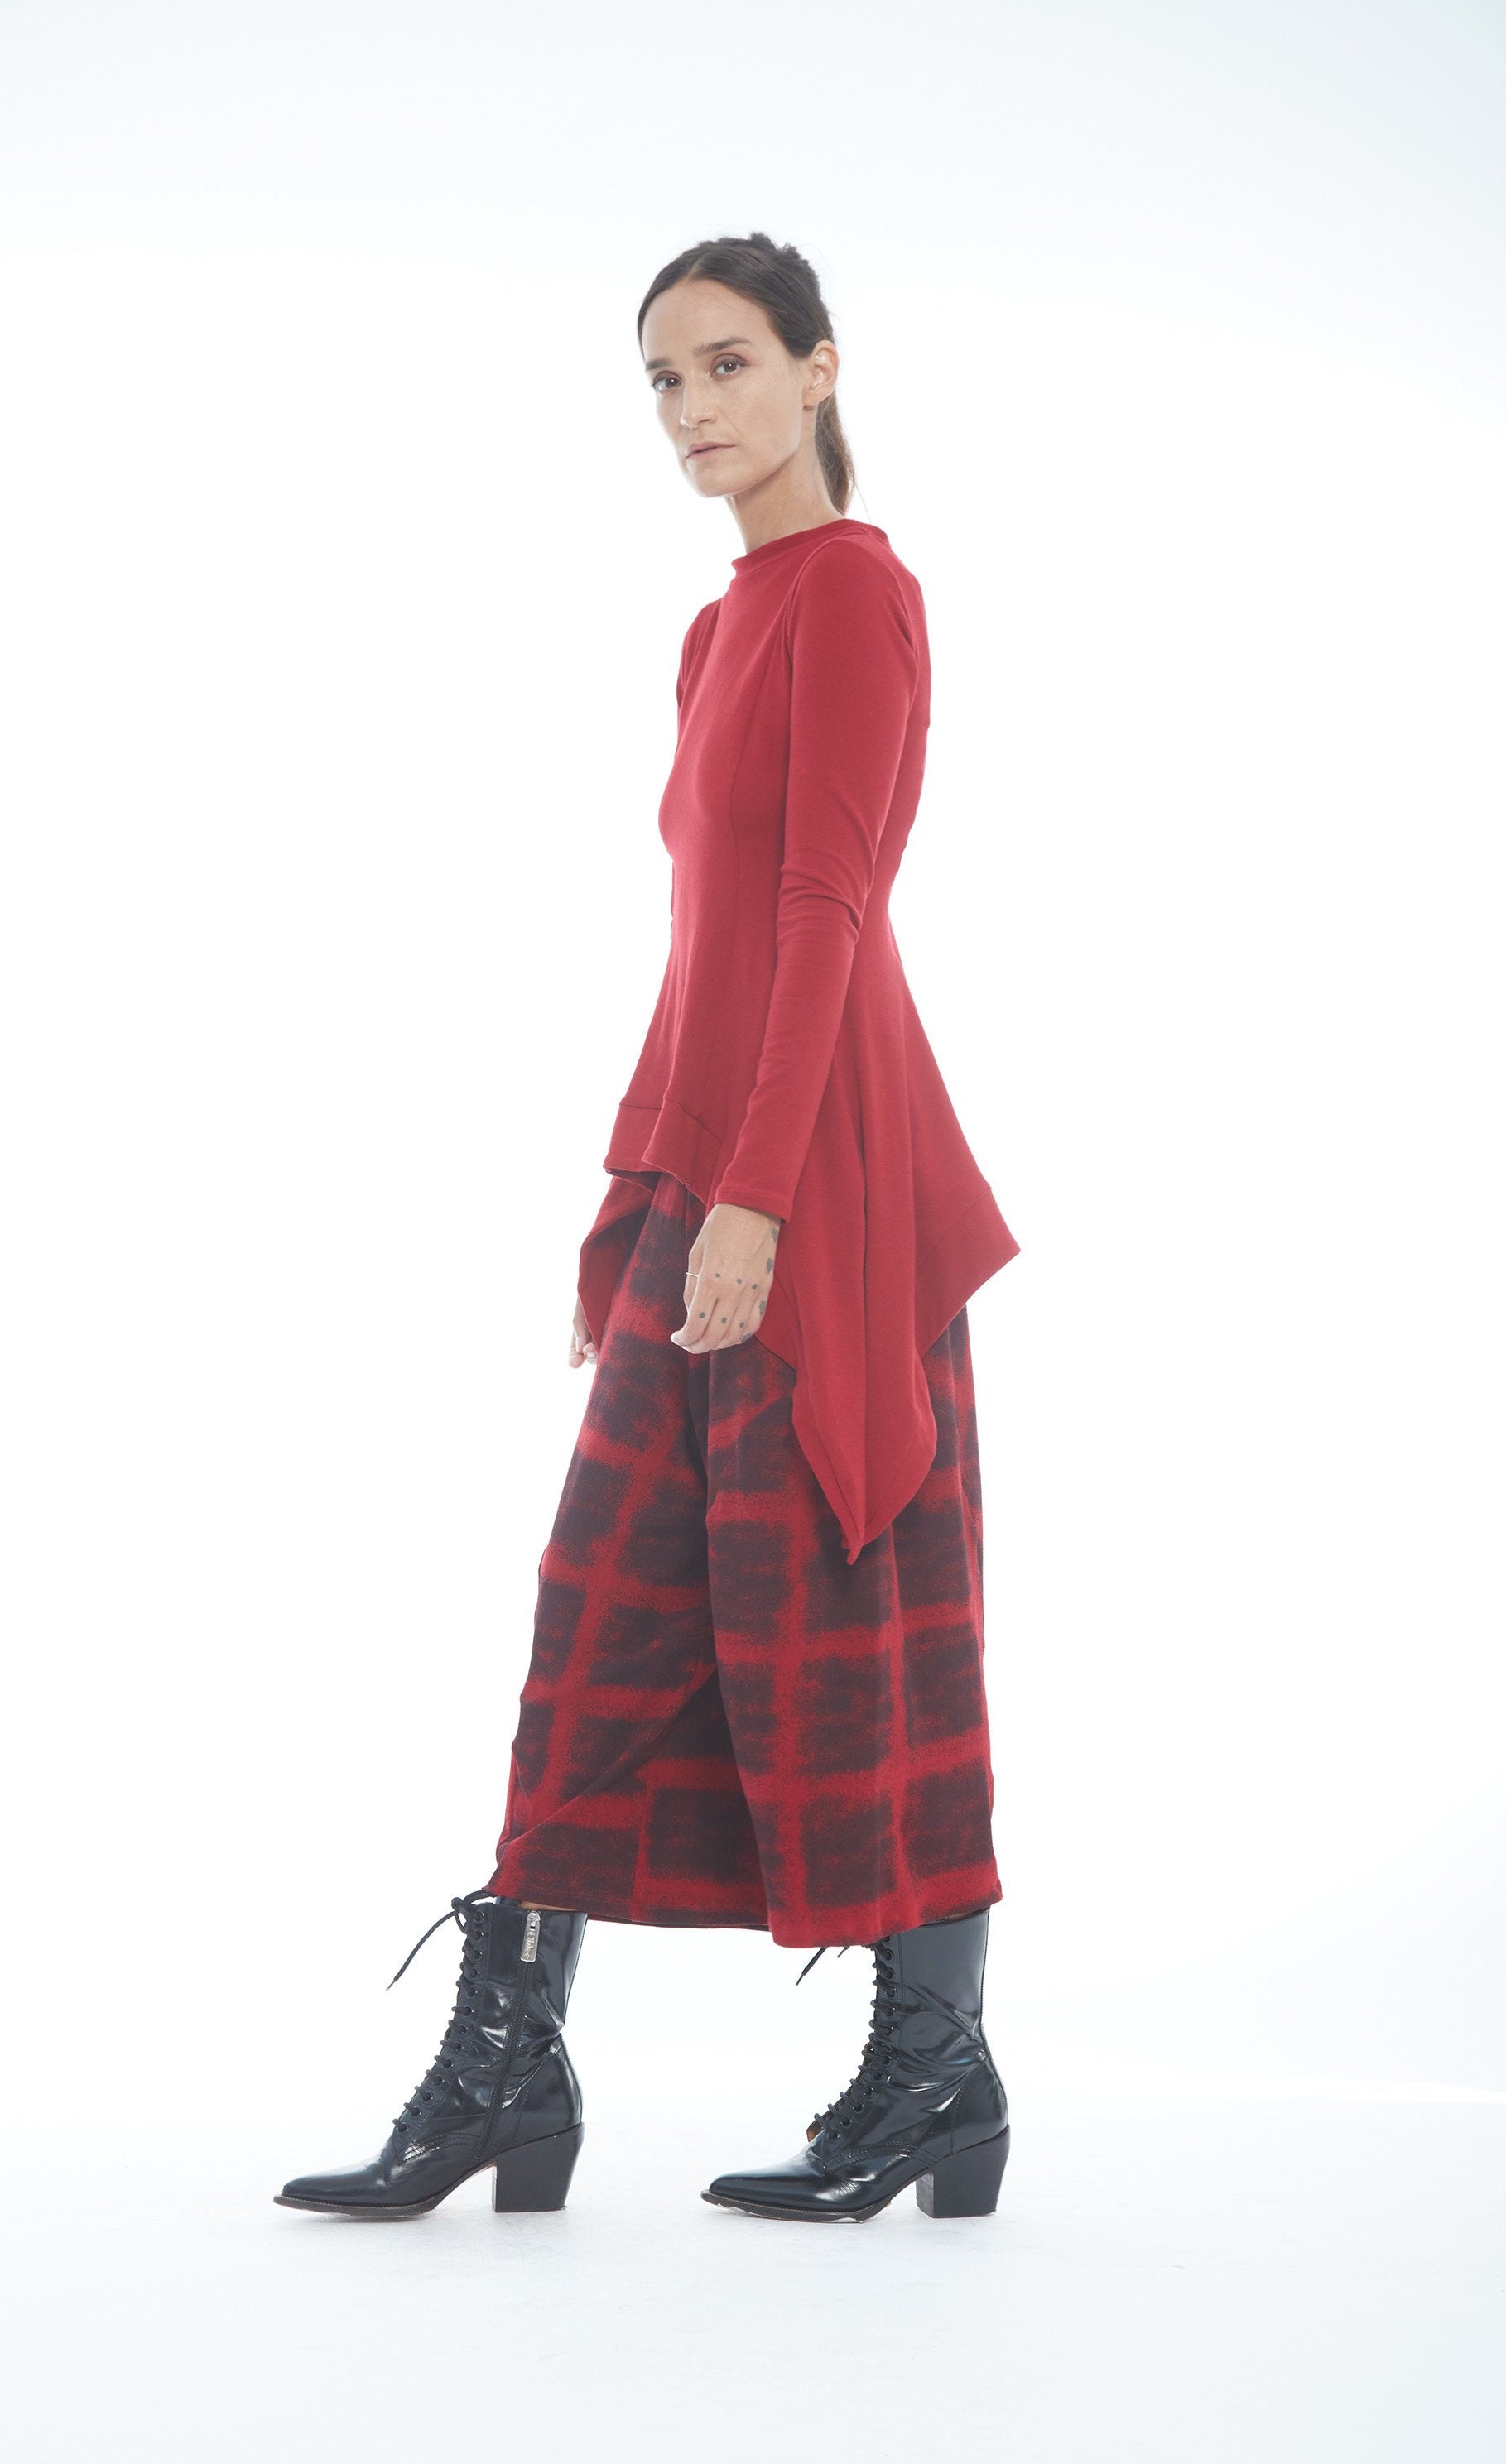 Front left side full body view of a woman wearing the mxmatthidlur lana top in red. This top has long sleeves, longer sides, and a high boat neck.